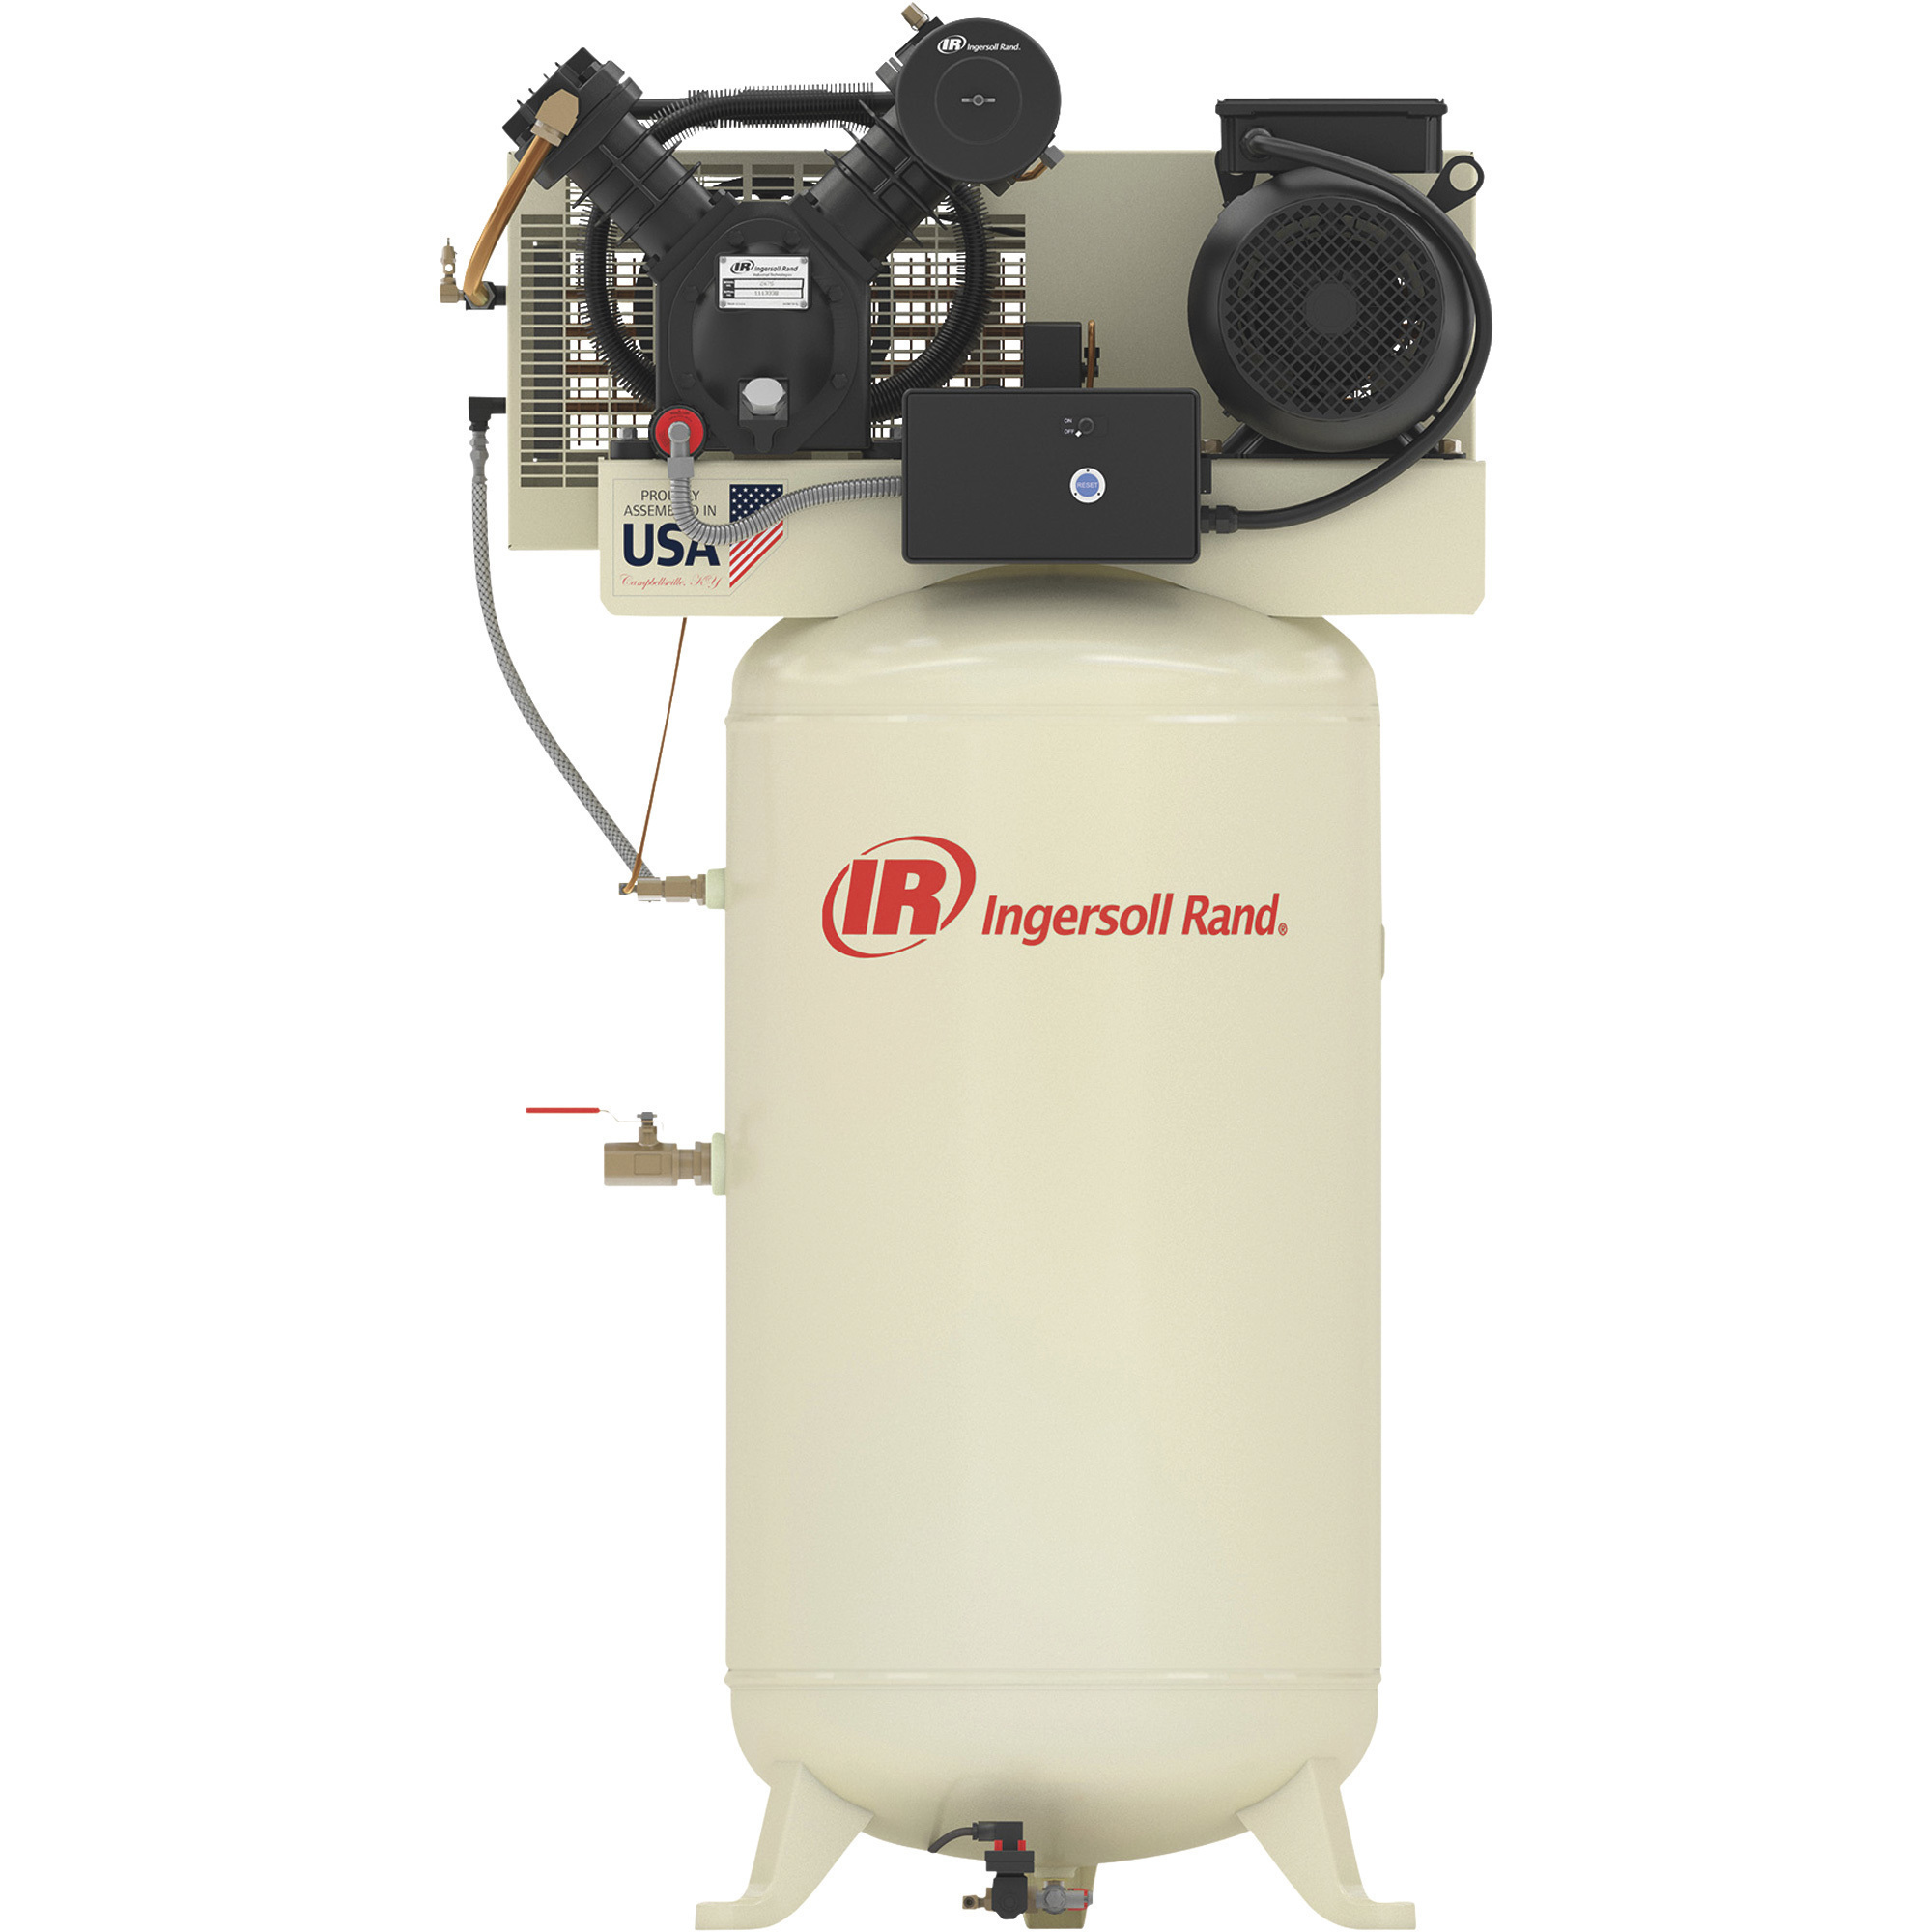 Ingersoll Rand Type-30 Reciprocating Air Compressor (Premium Package) — 7.5 HP, 200 Volt, 3 Phase, 80 Gallon Vertical, Model 2475N7.5-P -  45465531